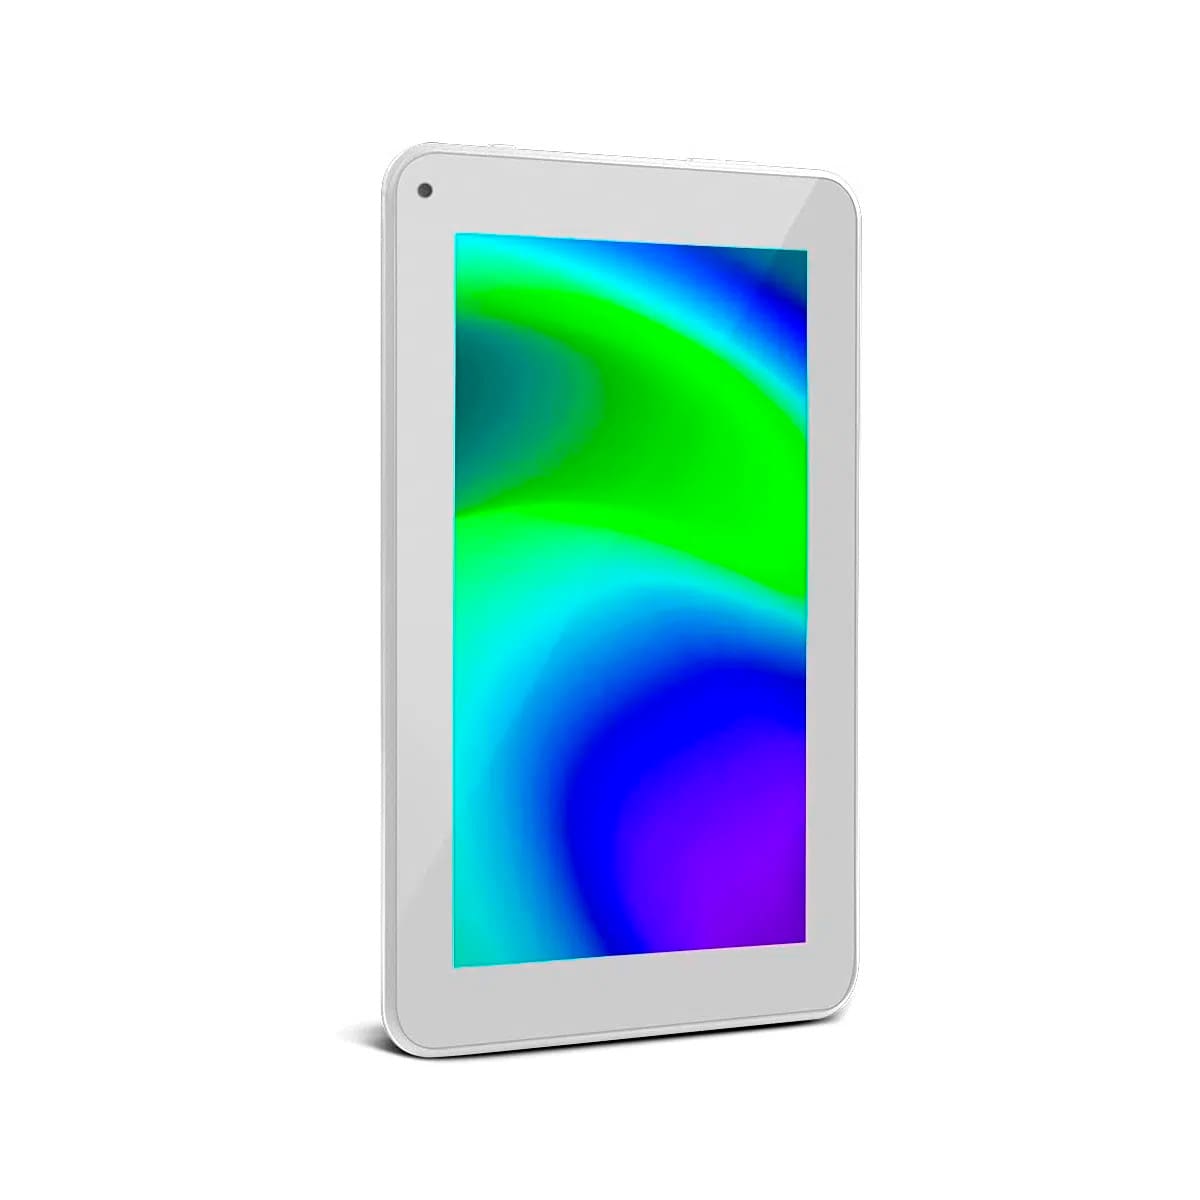 Tablet Multilaser M7 Wifi 32GB Tela 7 Android 11 Go Edition Branco - NB356